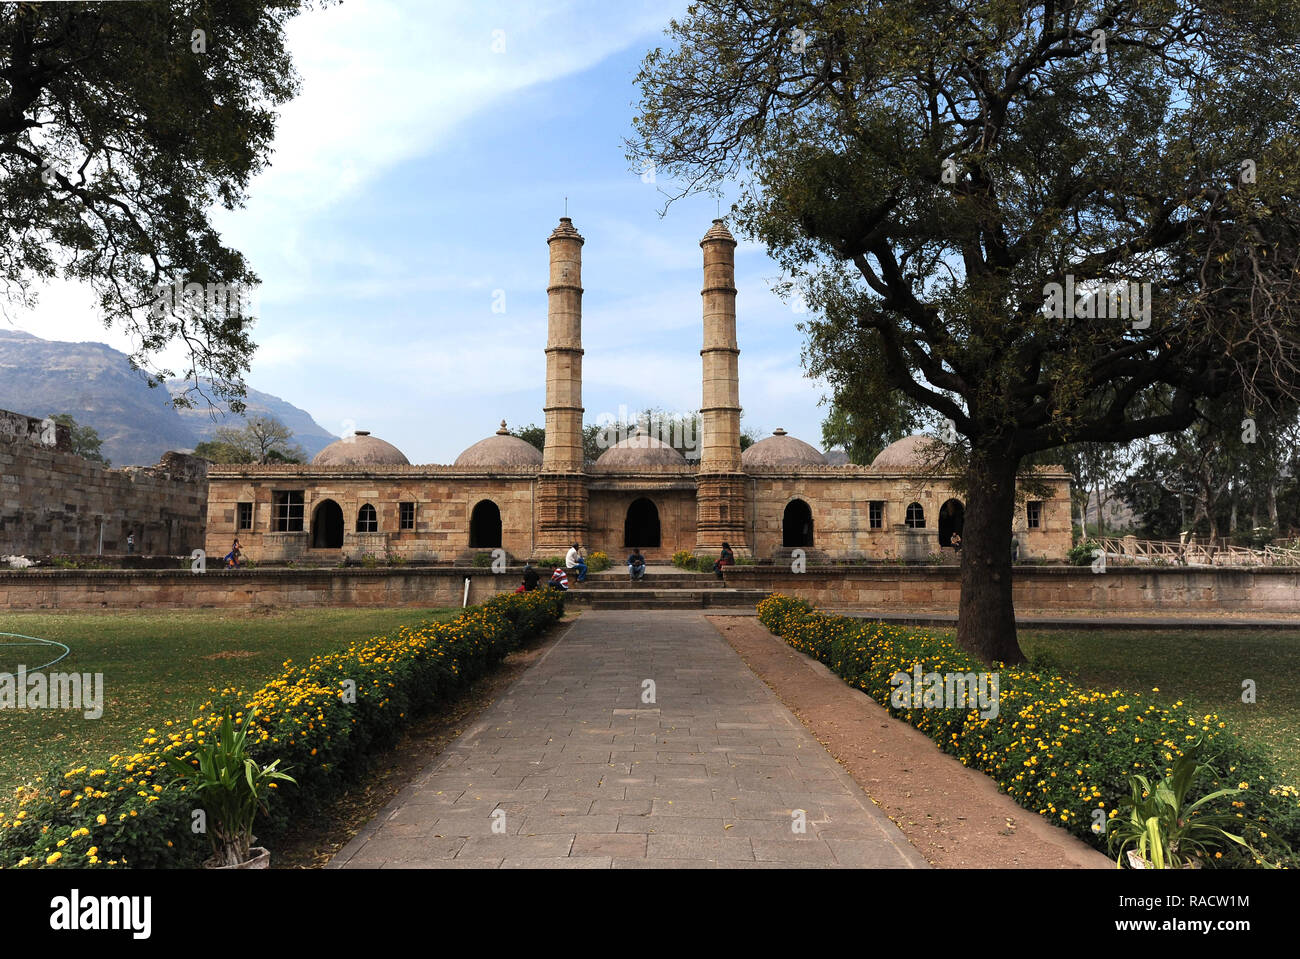 The 16th century Sahar ki Masjid, built near the royal palace for exclusive use of the sultans, Champaner, Gujarat, India, Asia Stock Photo